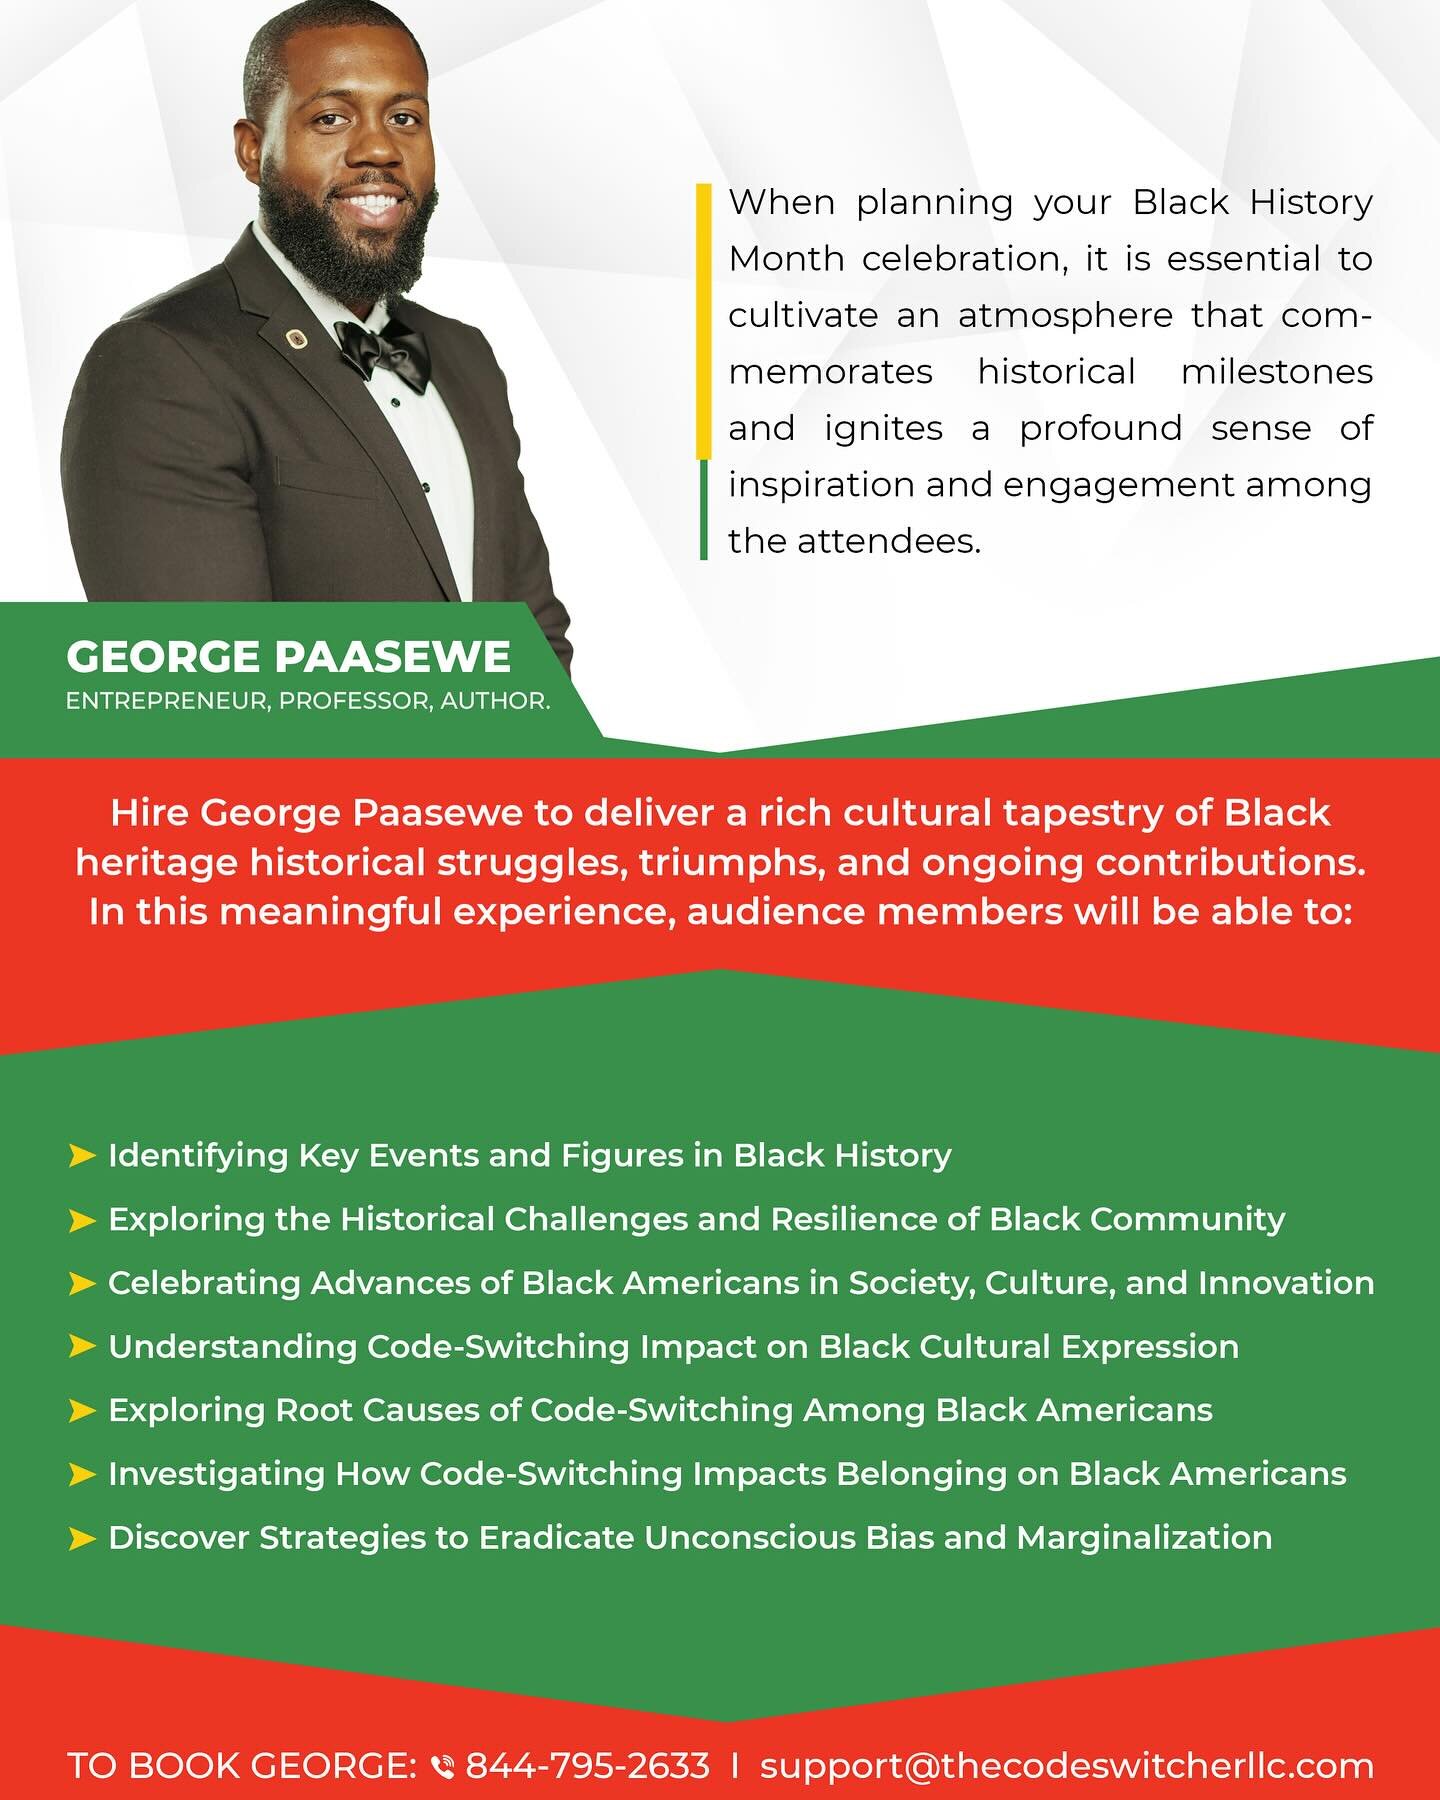 Book The Code-Switcher for a dynamic Black History Month event to explore key events, celebrate Black culture, and understand code-switching&rsquo;s impact on Black expression

#georgepaasewe 
#thecodeswitcher 
#diversity 
#diversityandinclusion 
#eq